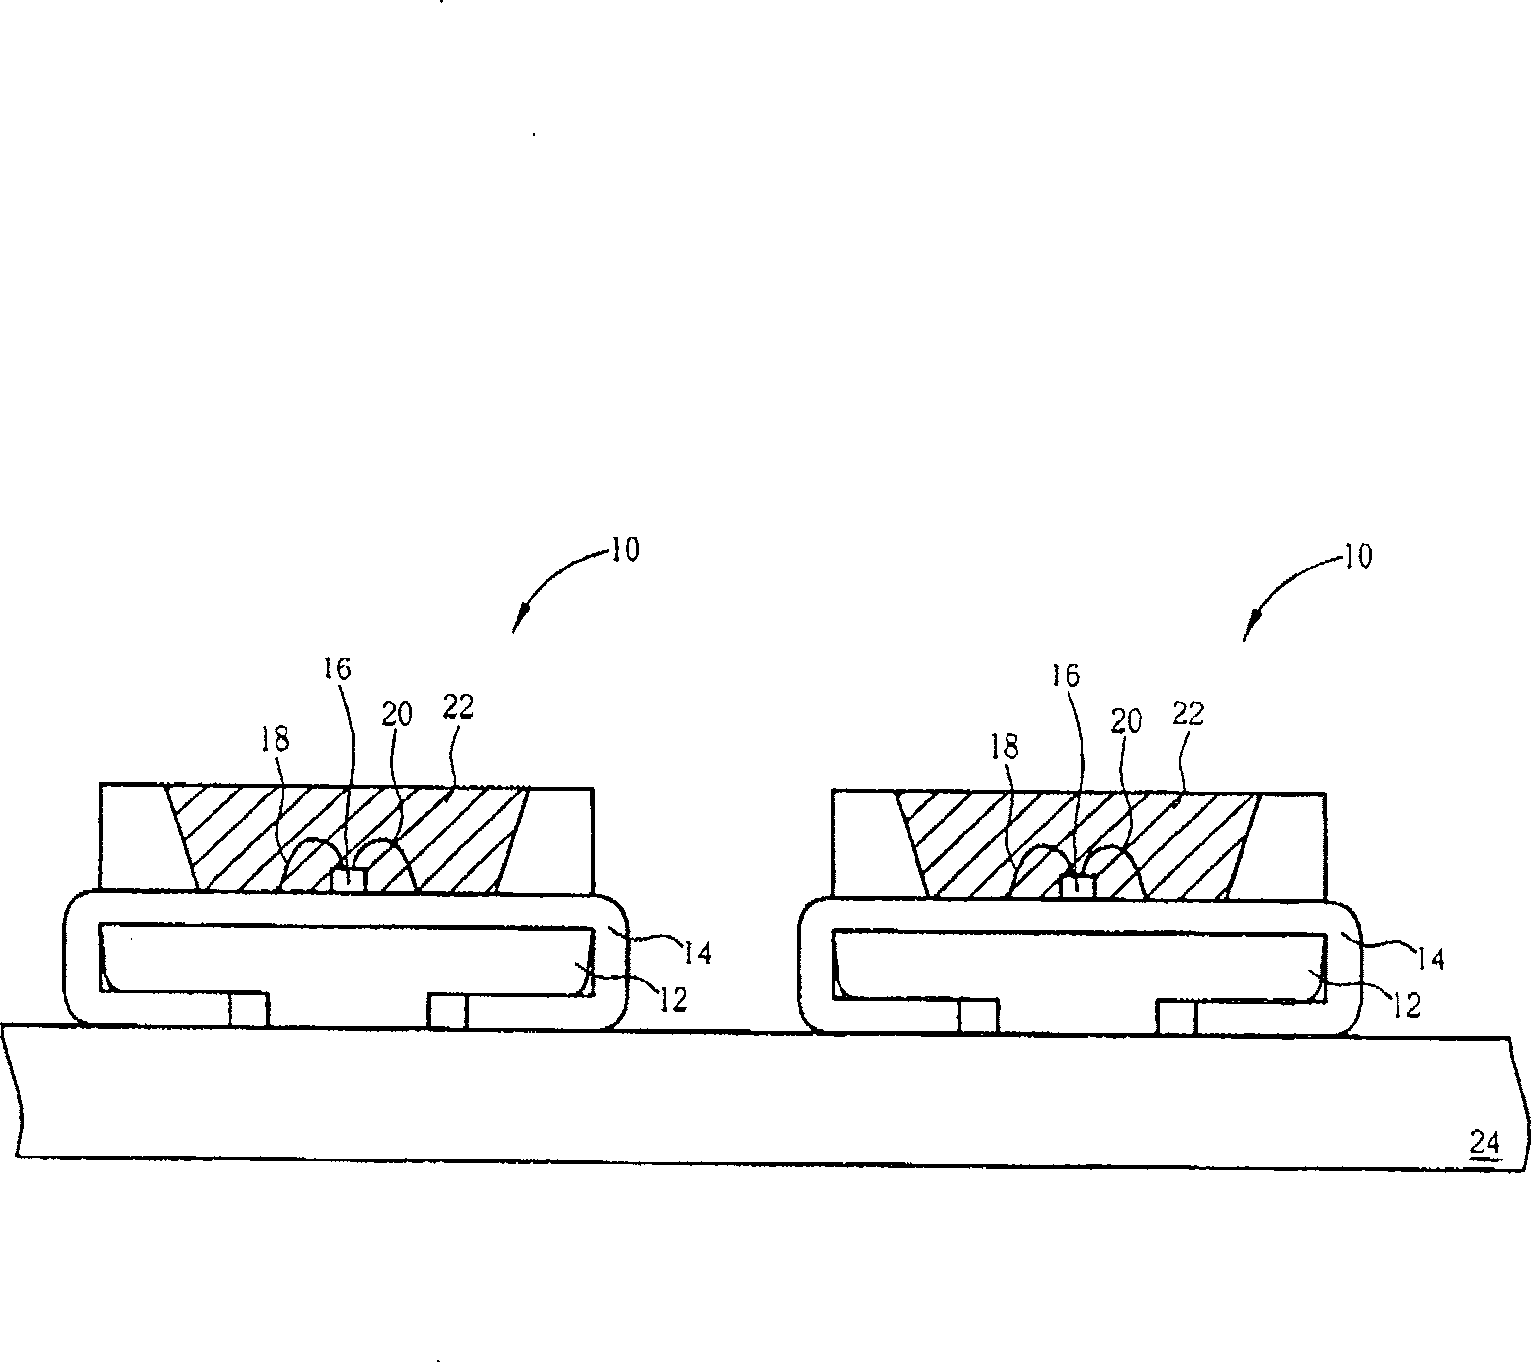 Optoelectronic component packaging structure having silicon substrates